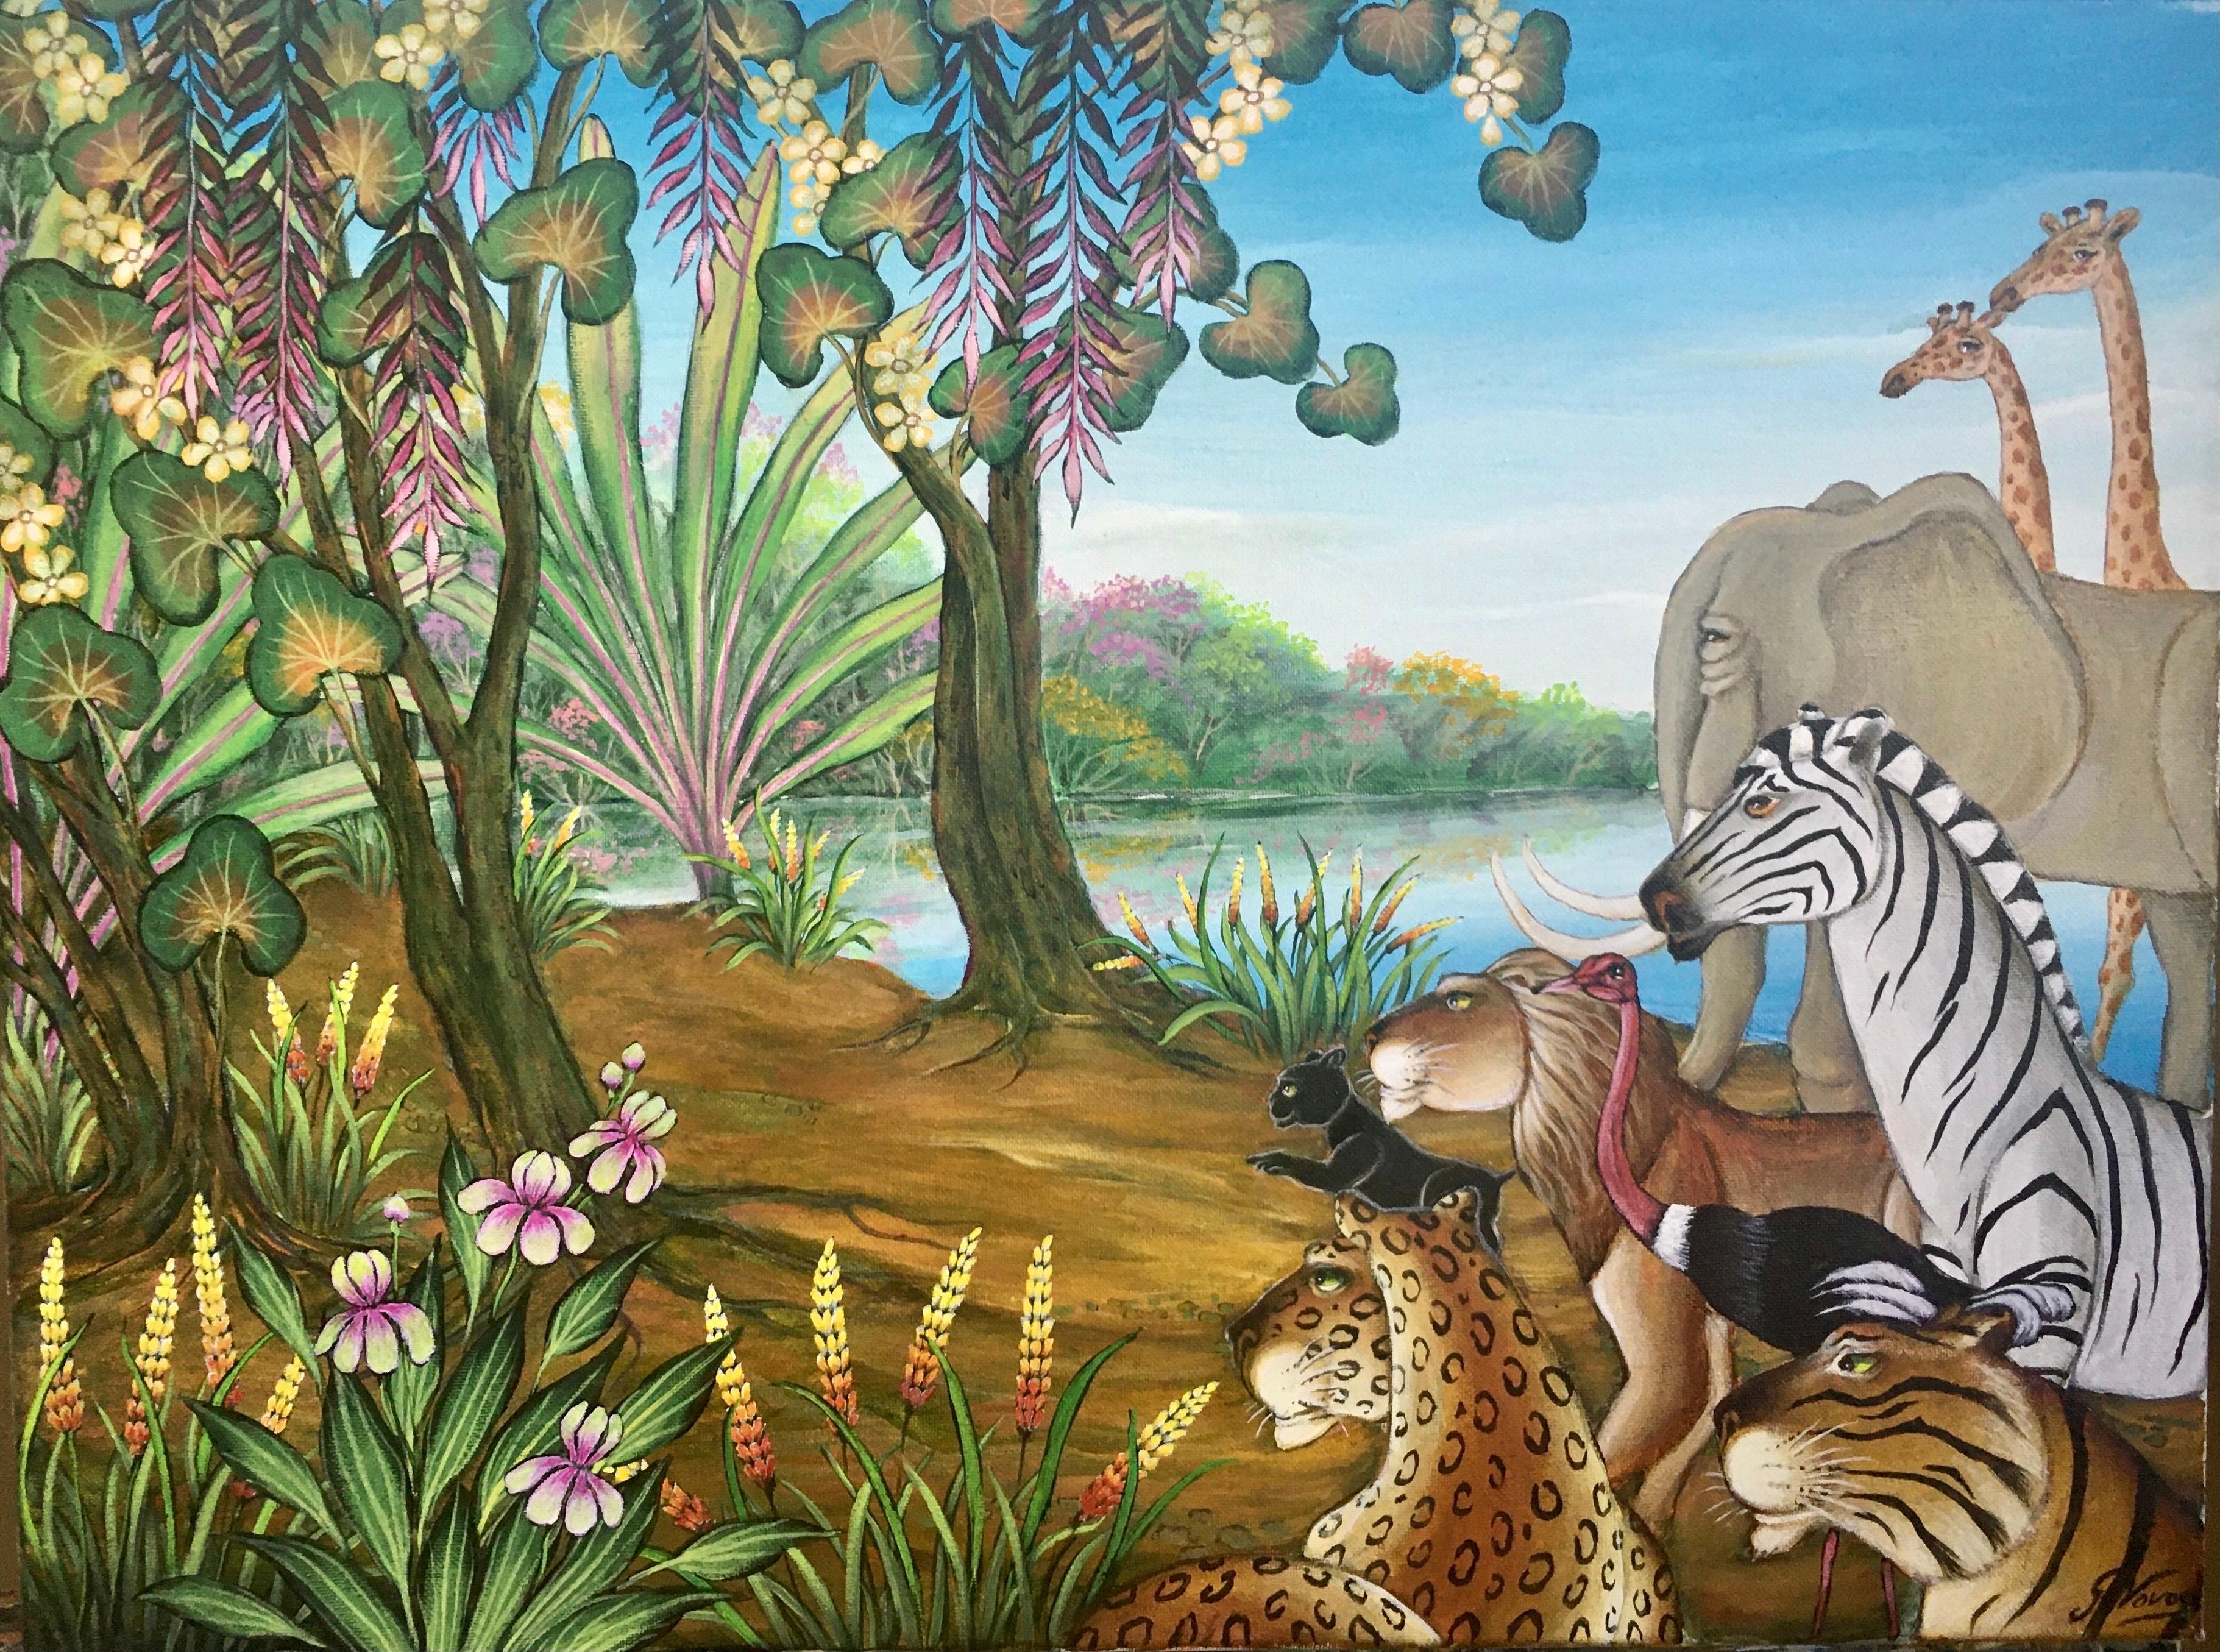 Original Painting Zebra Lion Tiger Elephant Flowers Jungle Painting setting. Titled "The Promising Venue".

Gustavo Novoa, Born 1941 in Santiago, Chile, He attended the Academy of Fine Arts. Novoa made his debut as an artist in the early 1960¹s